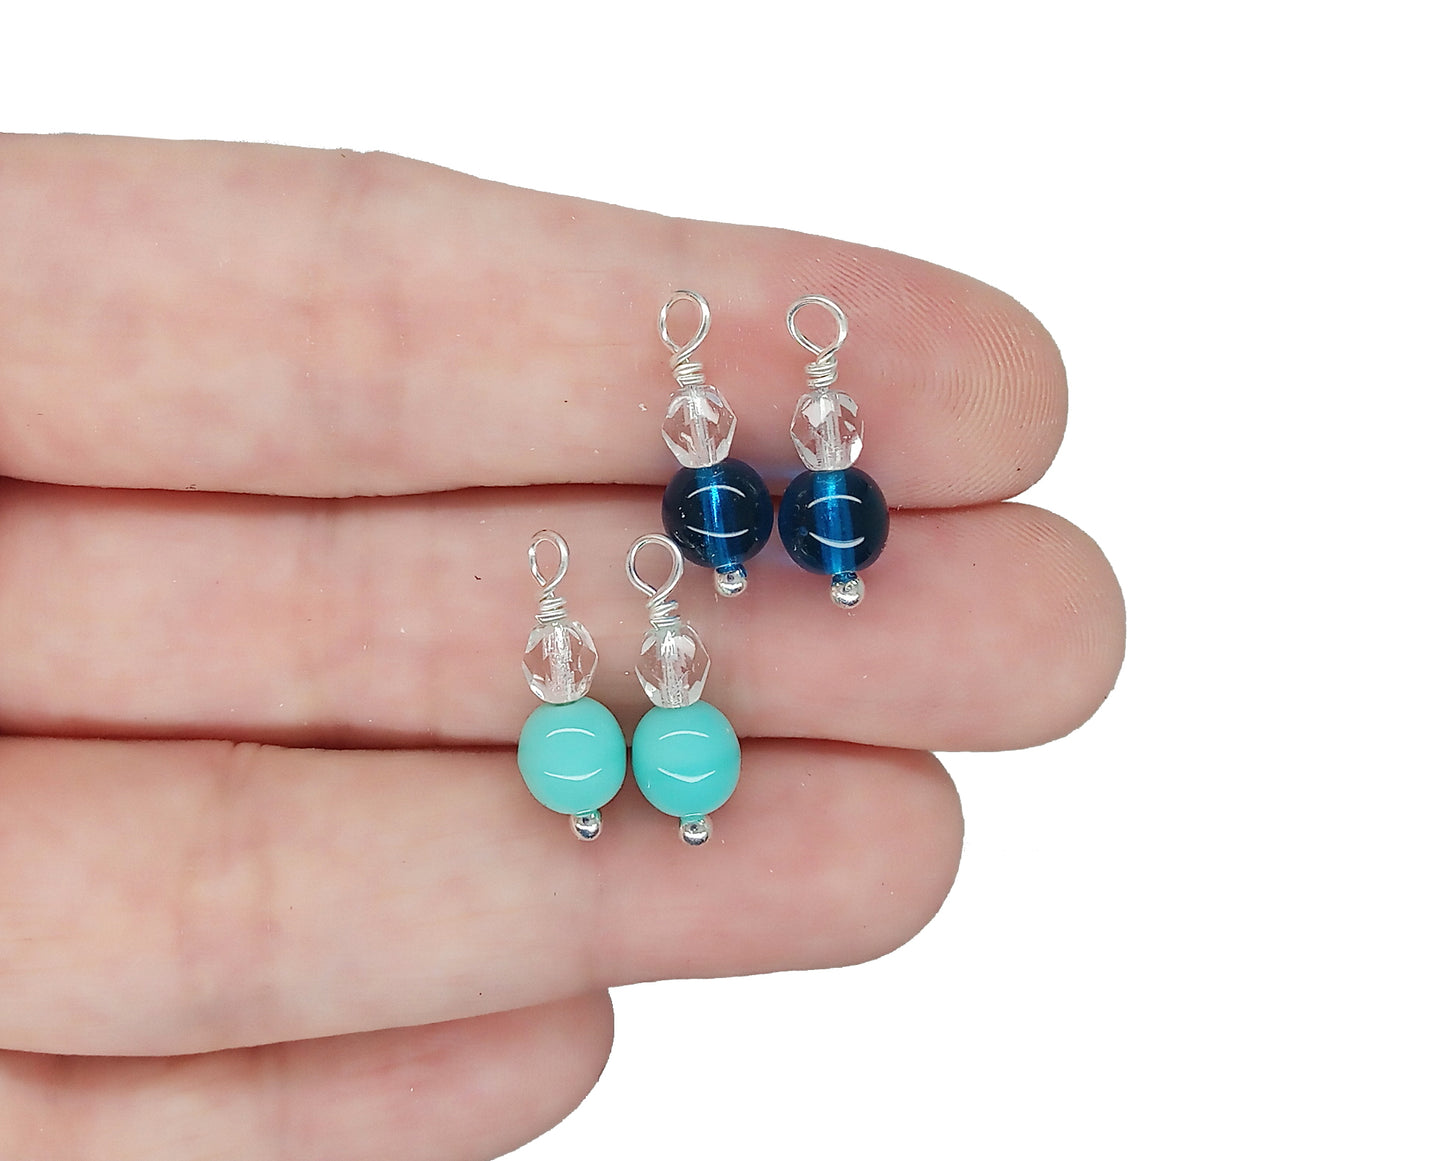 Bead Charms for Earrings - 6 pairs of Pretty Dangles in Blues - Adorabilities Charms & Trinkets